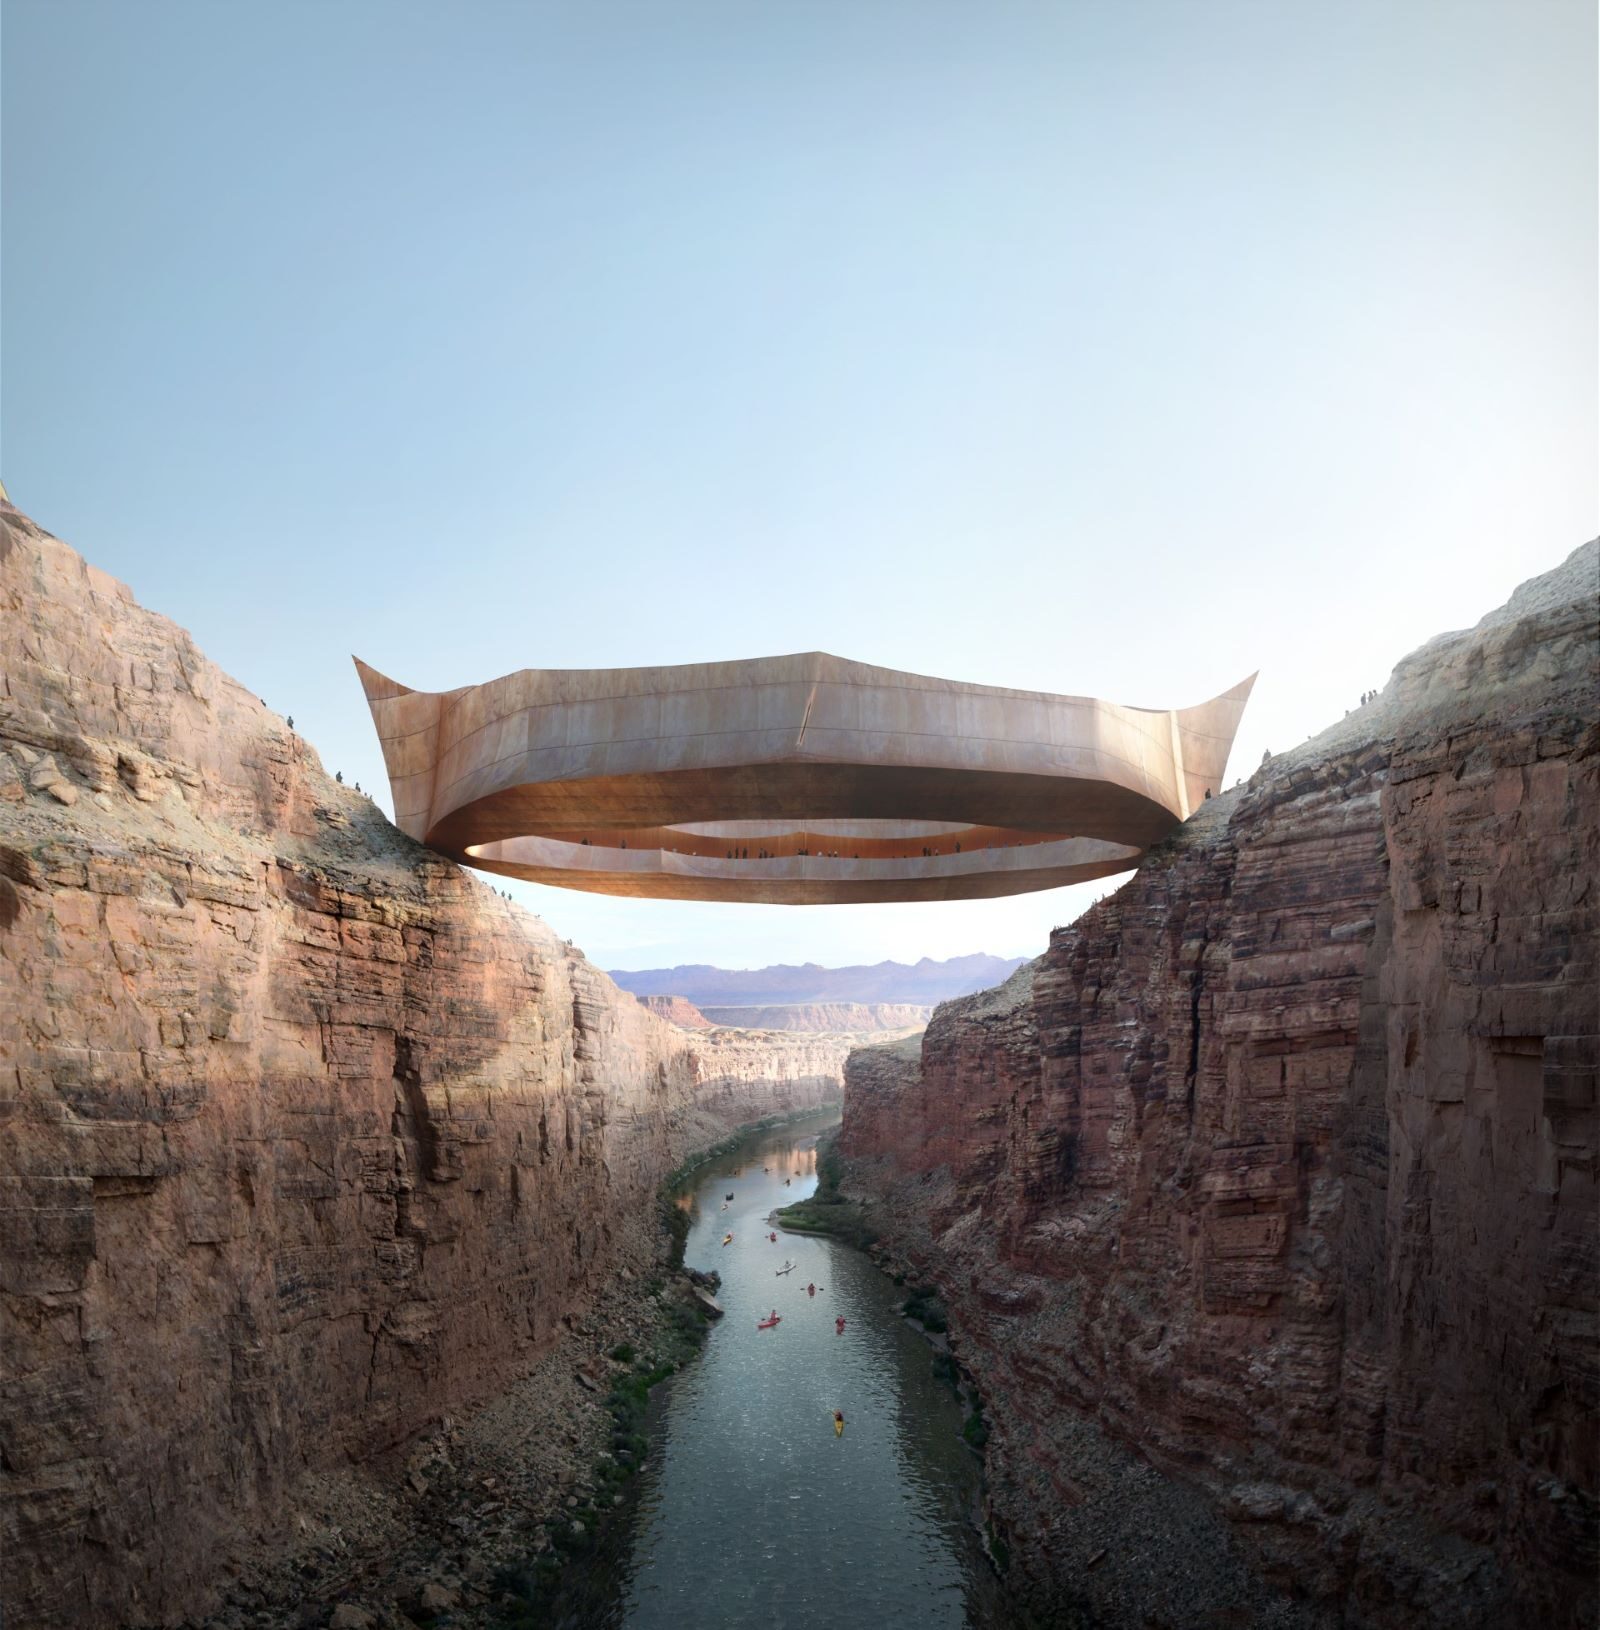 A circular structure spans across a wide river canyon.